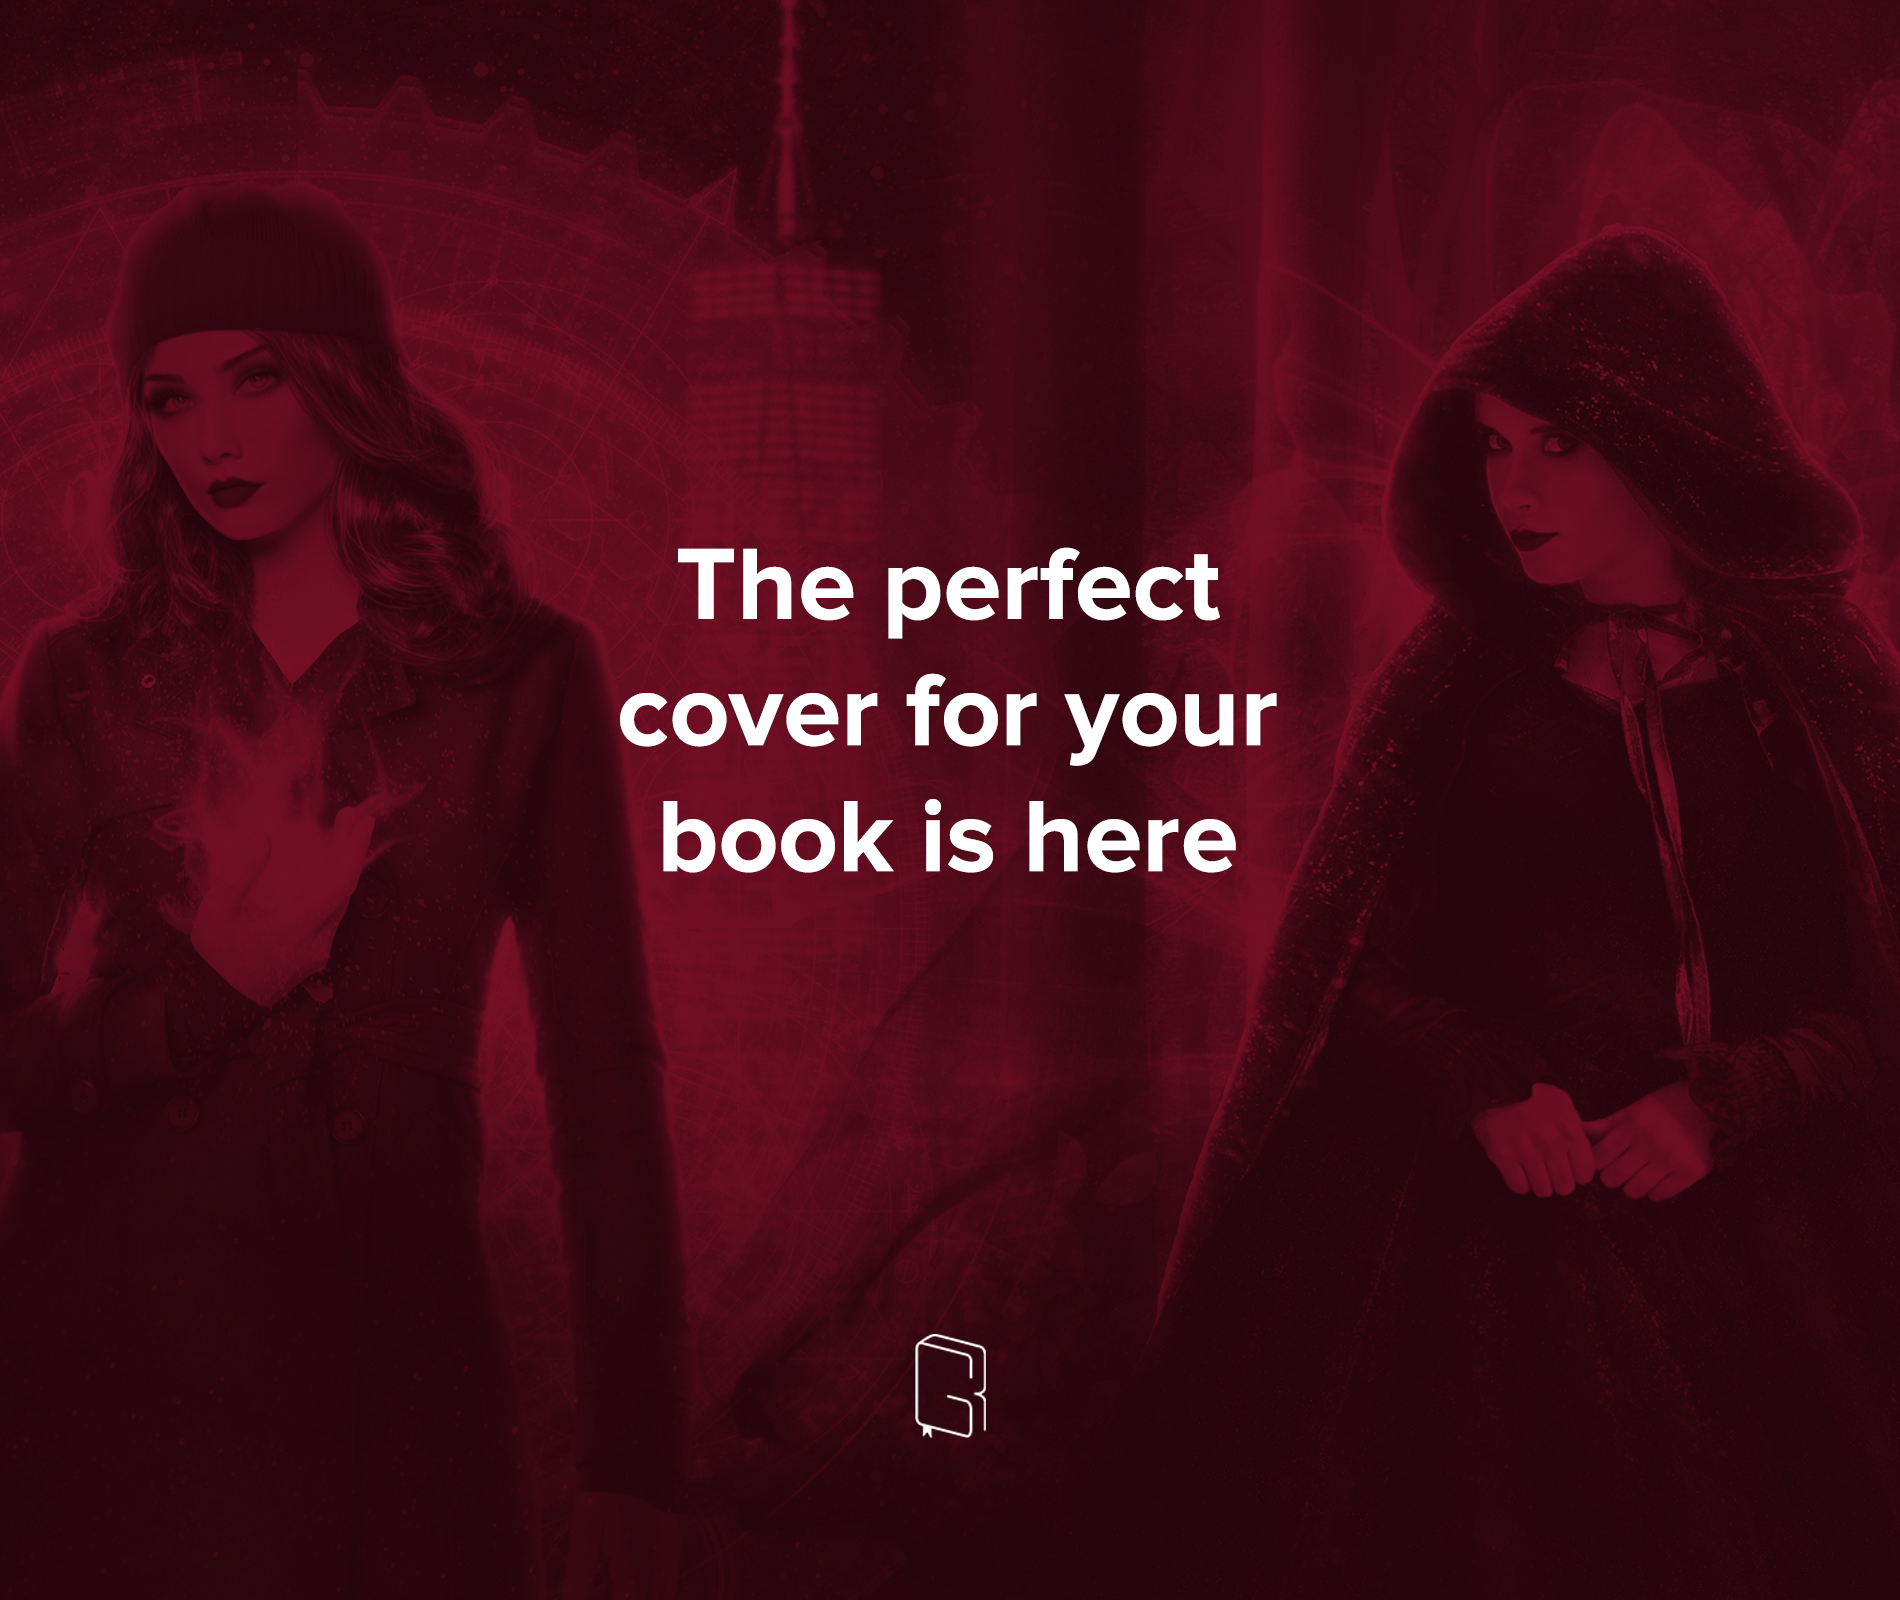 The perfect cover for your book is here